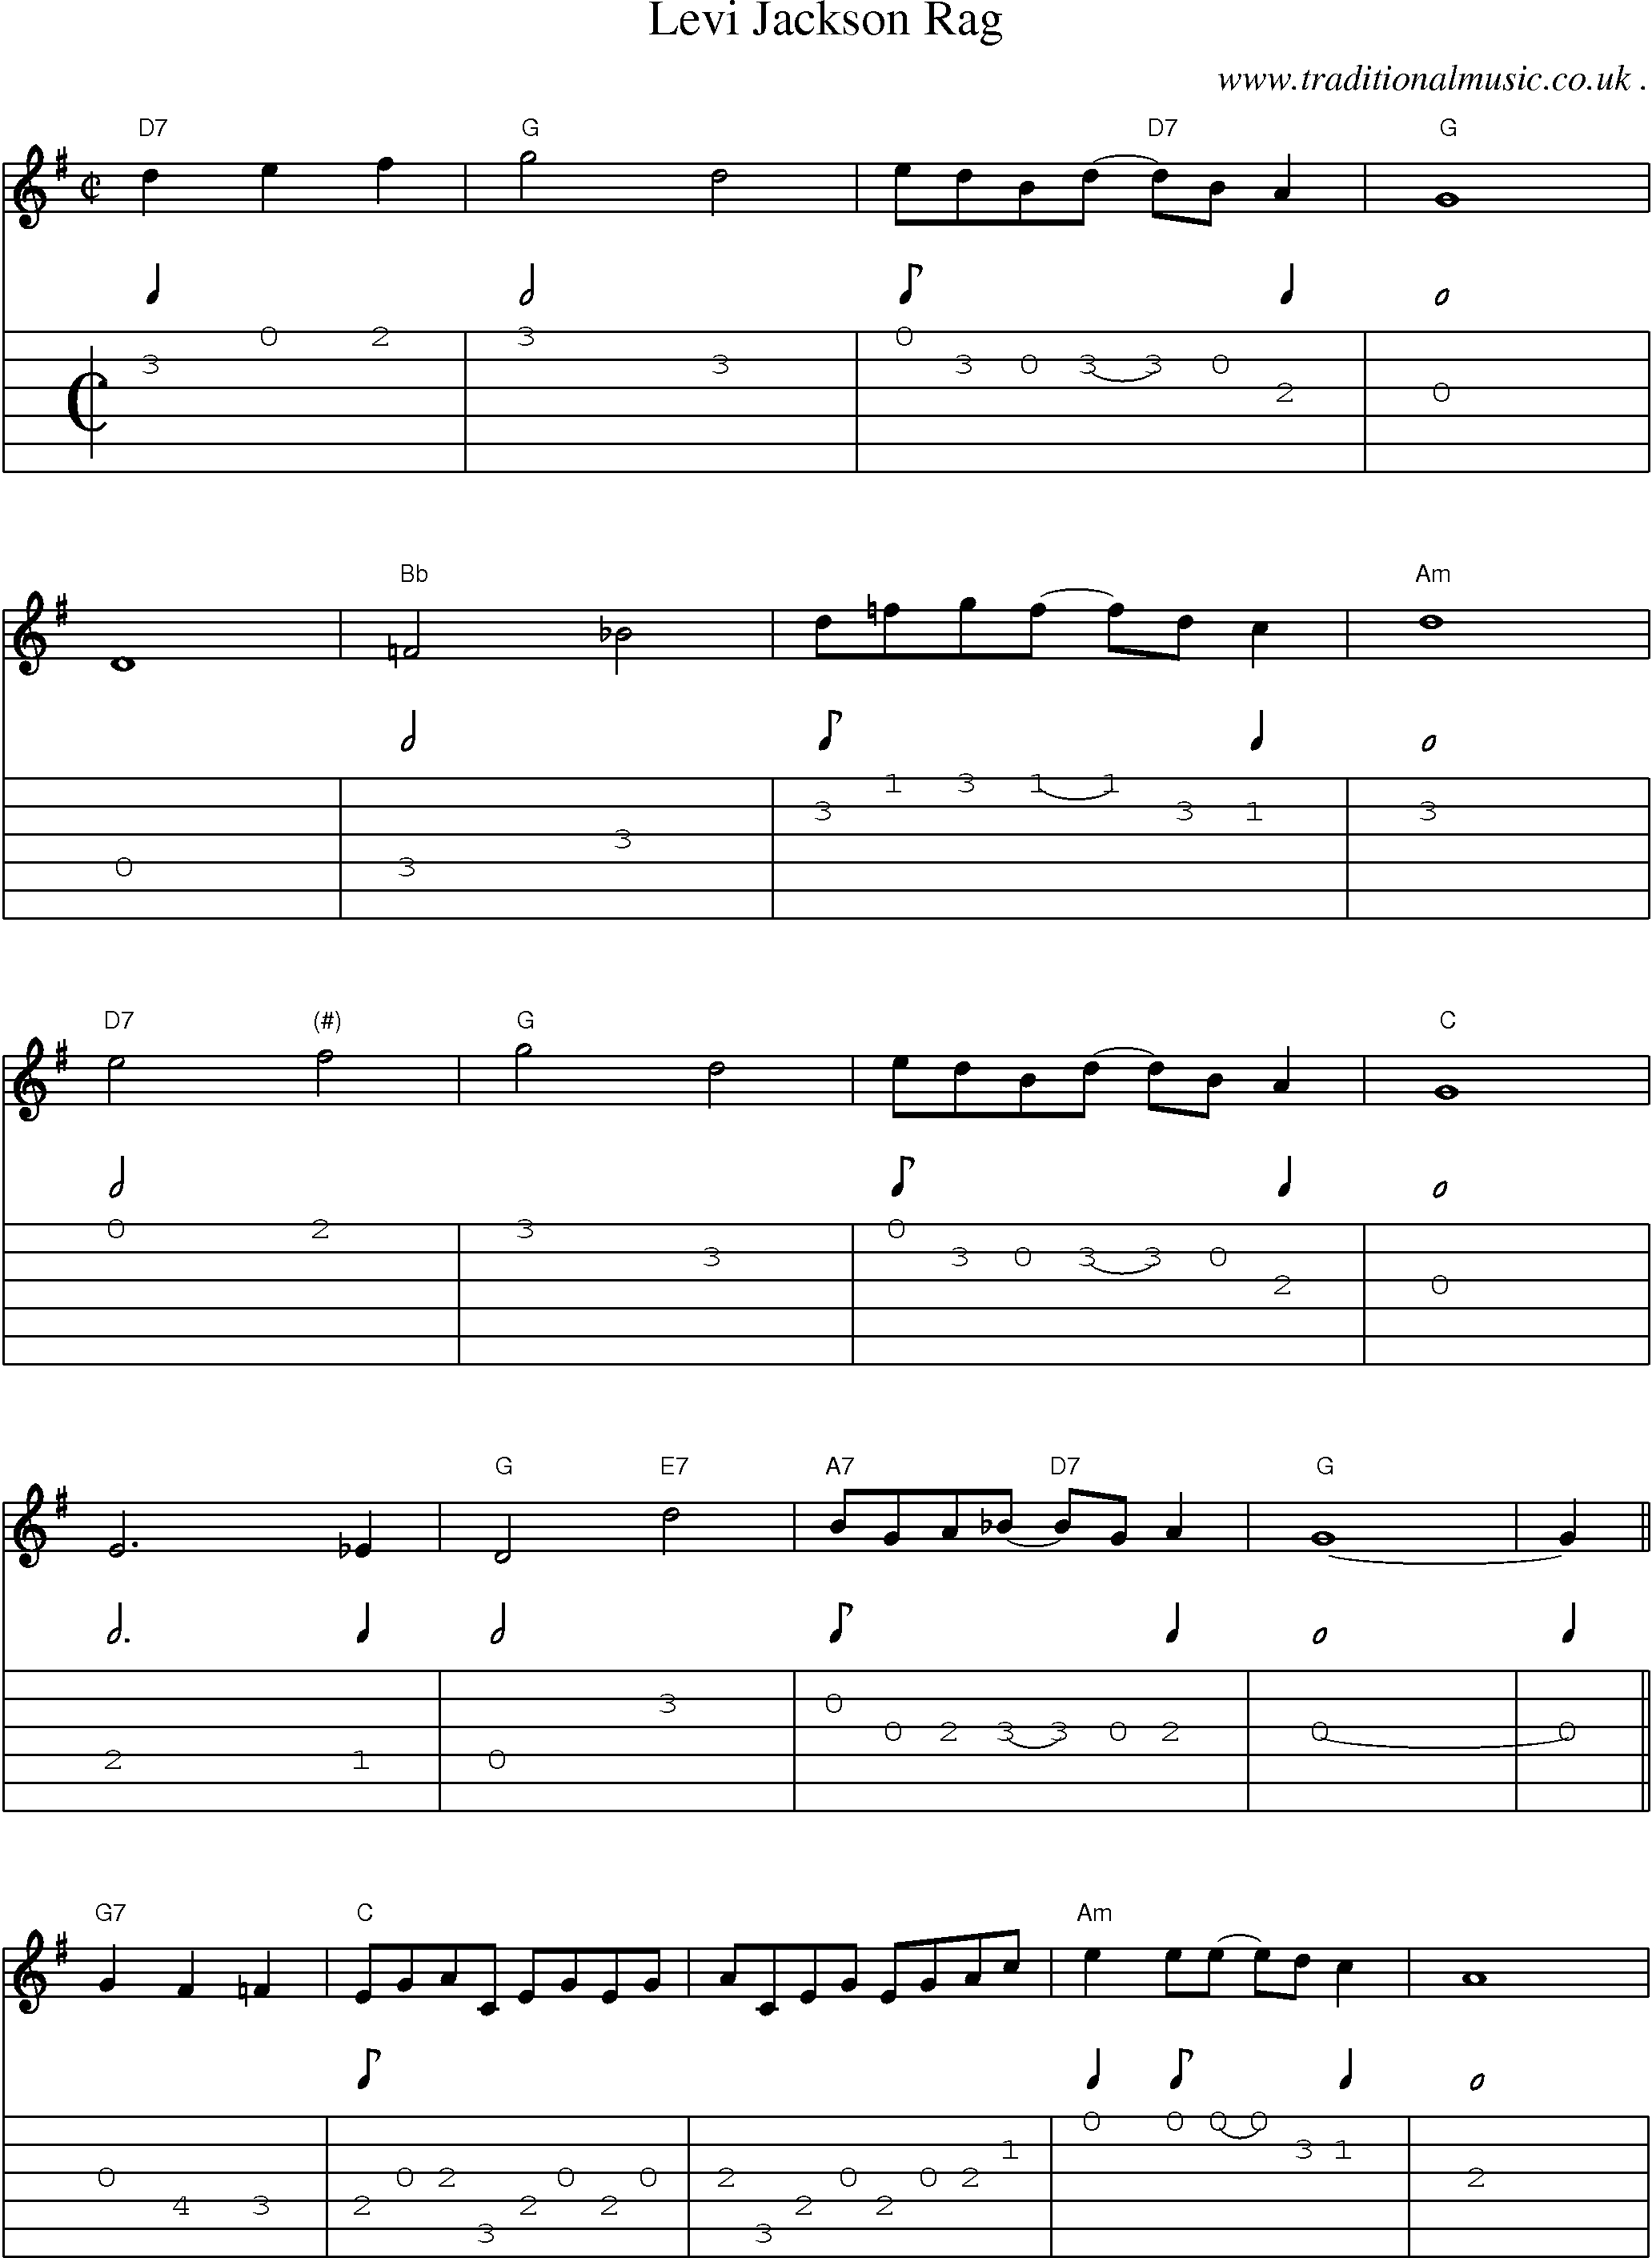 Music Score and Guitar Tabs for Levi Jackson Rag